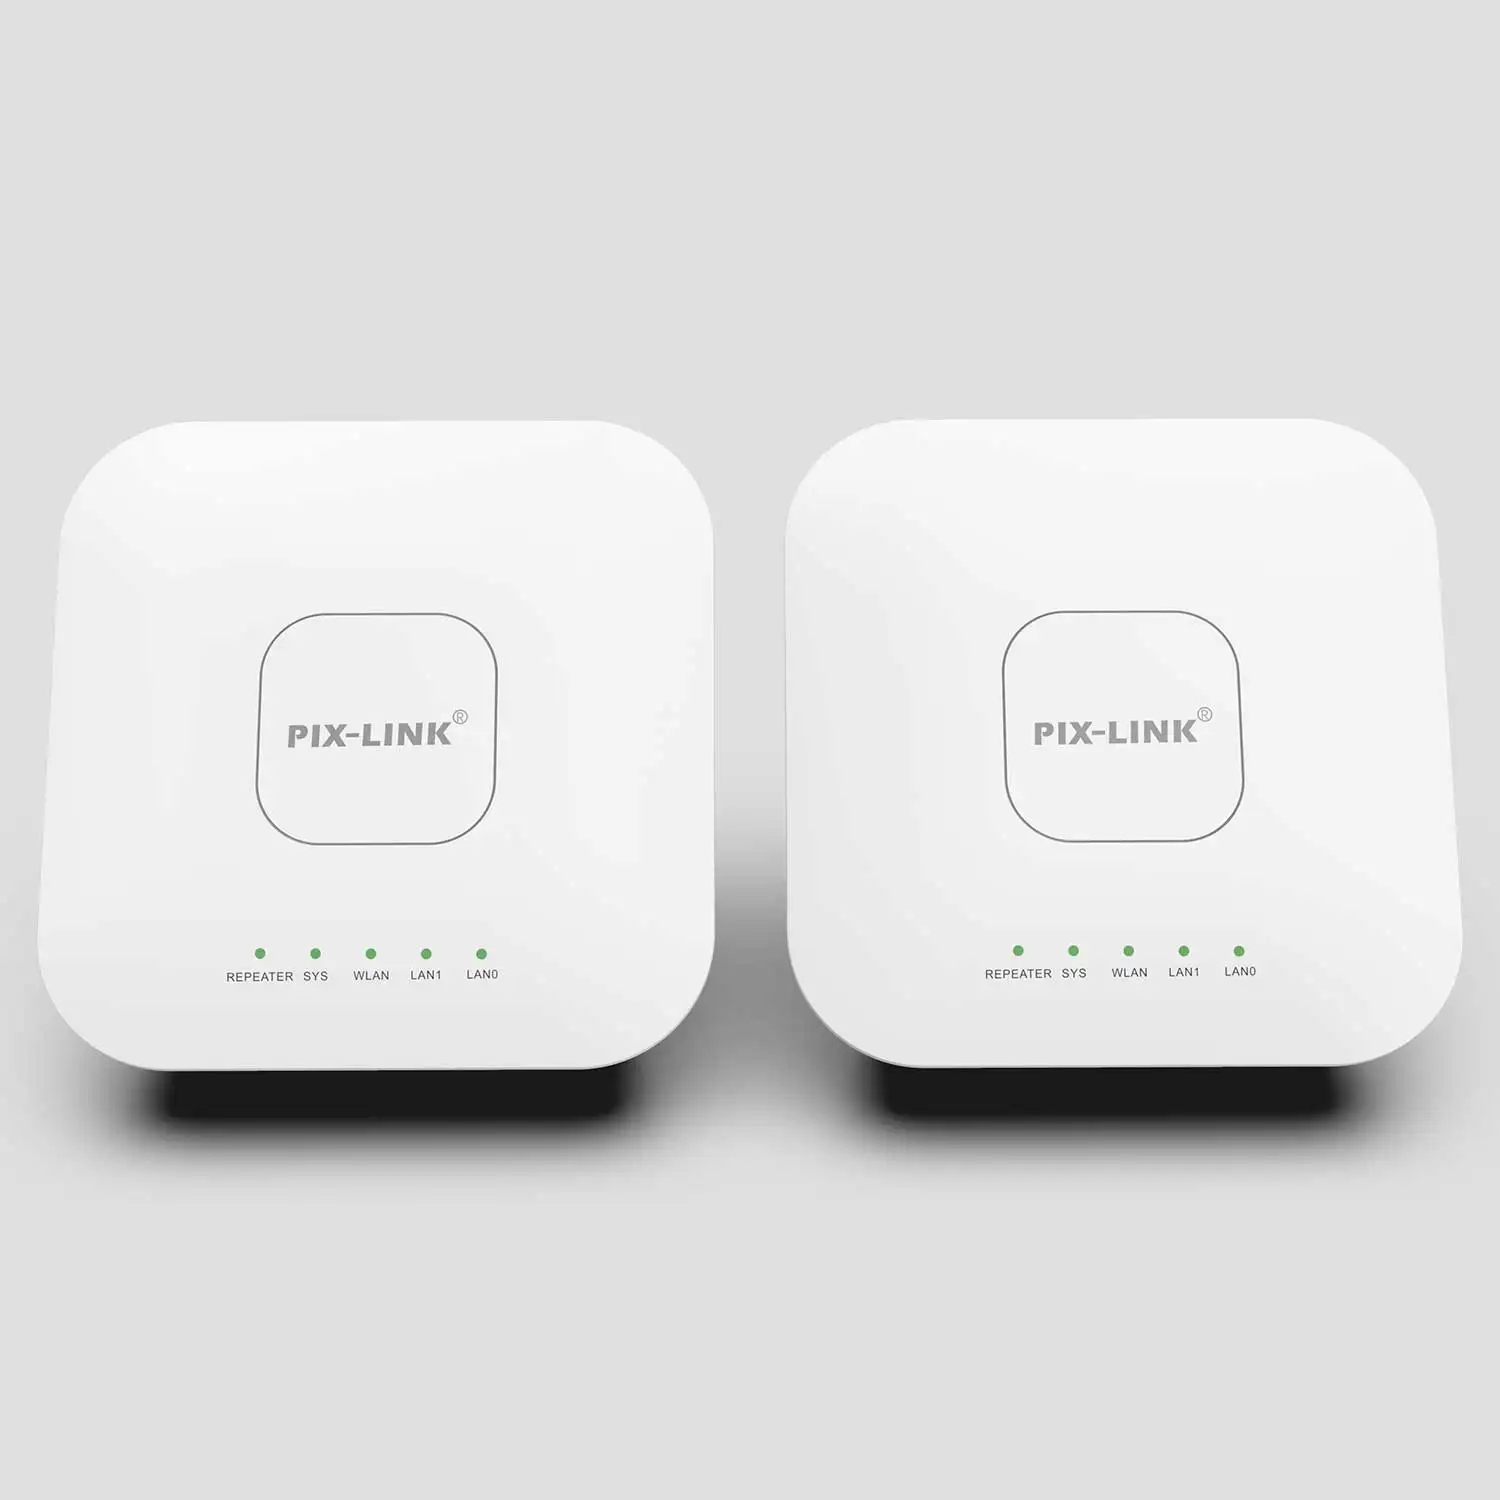 O6 10KM 5GHz 11ac 433Mbps Outdoor CPE Wireless WiFi Repeater Extender Router AP Access Point WiFi Bridge with POE Adapter